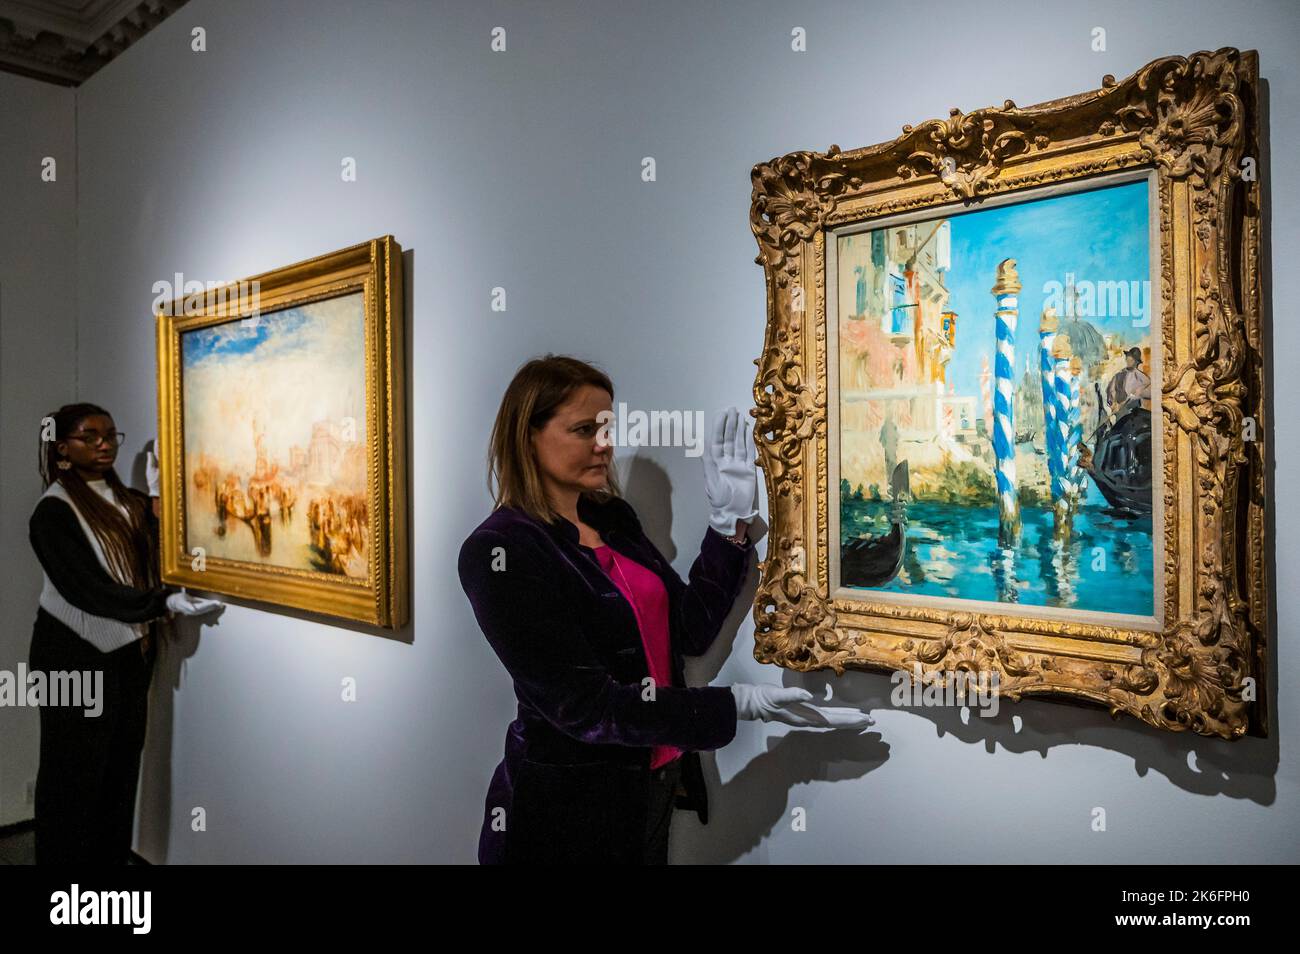 London, UK. 13th Oct, 2022. Joseph Mallord William Turner, Depositing of John Bellini's Three Pictures in La Chiesa Redentore, Venice, Estimate on request: in excess of $30,000,000, with Edouard Manet, Le Grand Canal à Venise, Painted in fall 1874, Estimate on request: in excess of $50,000,000 - Works from the estate of the philanthropist and co-founder of Microsoft, Paul G. Allen at Christies London. A free public exhibition runs from 14-17 October. All of the proceeds from the sale (New York - 9 & 10 November), will benefit philanthropic causes Credit: Guy Bell/Alamy Live News Stock Photo